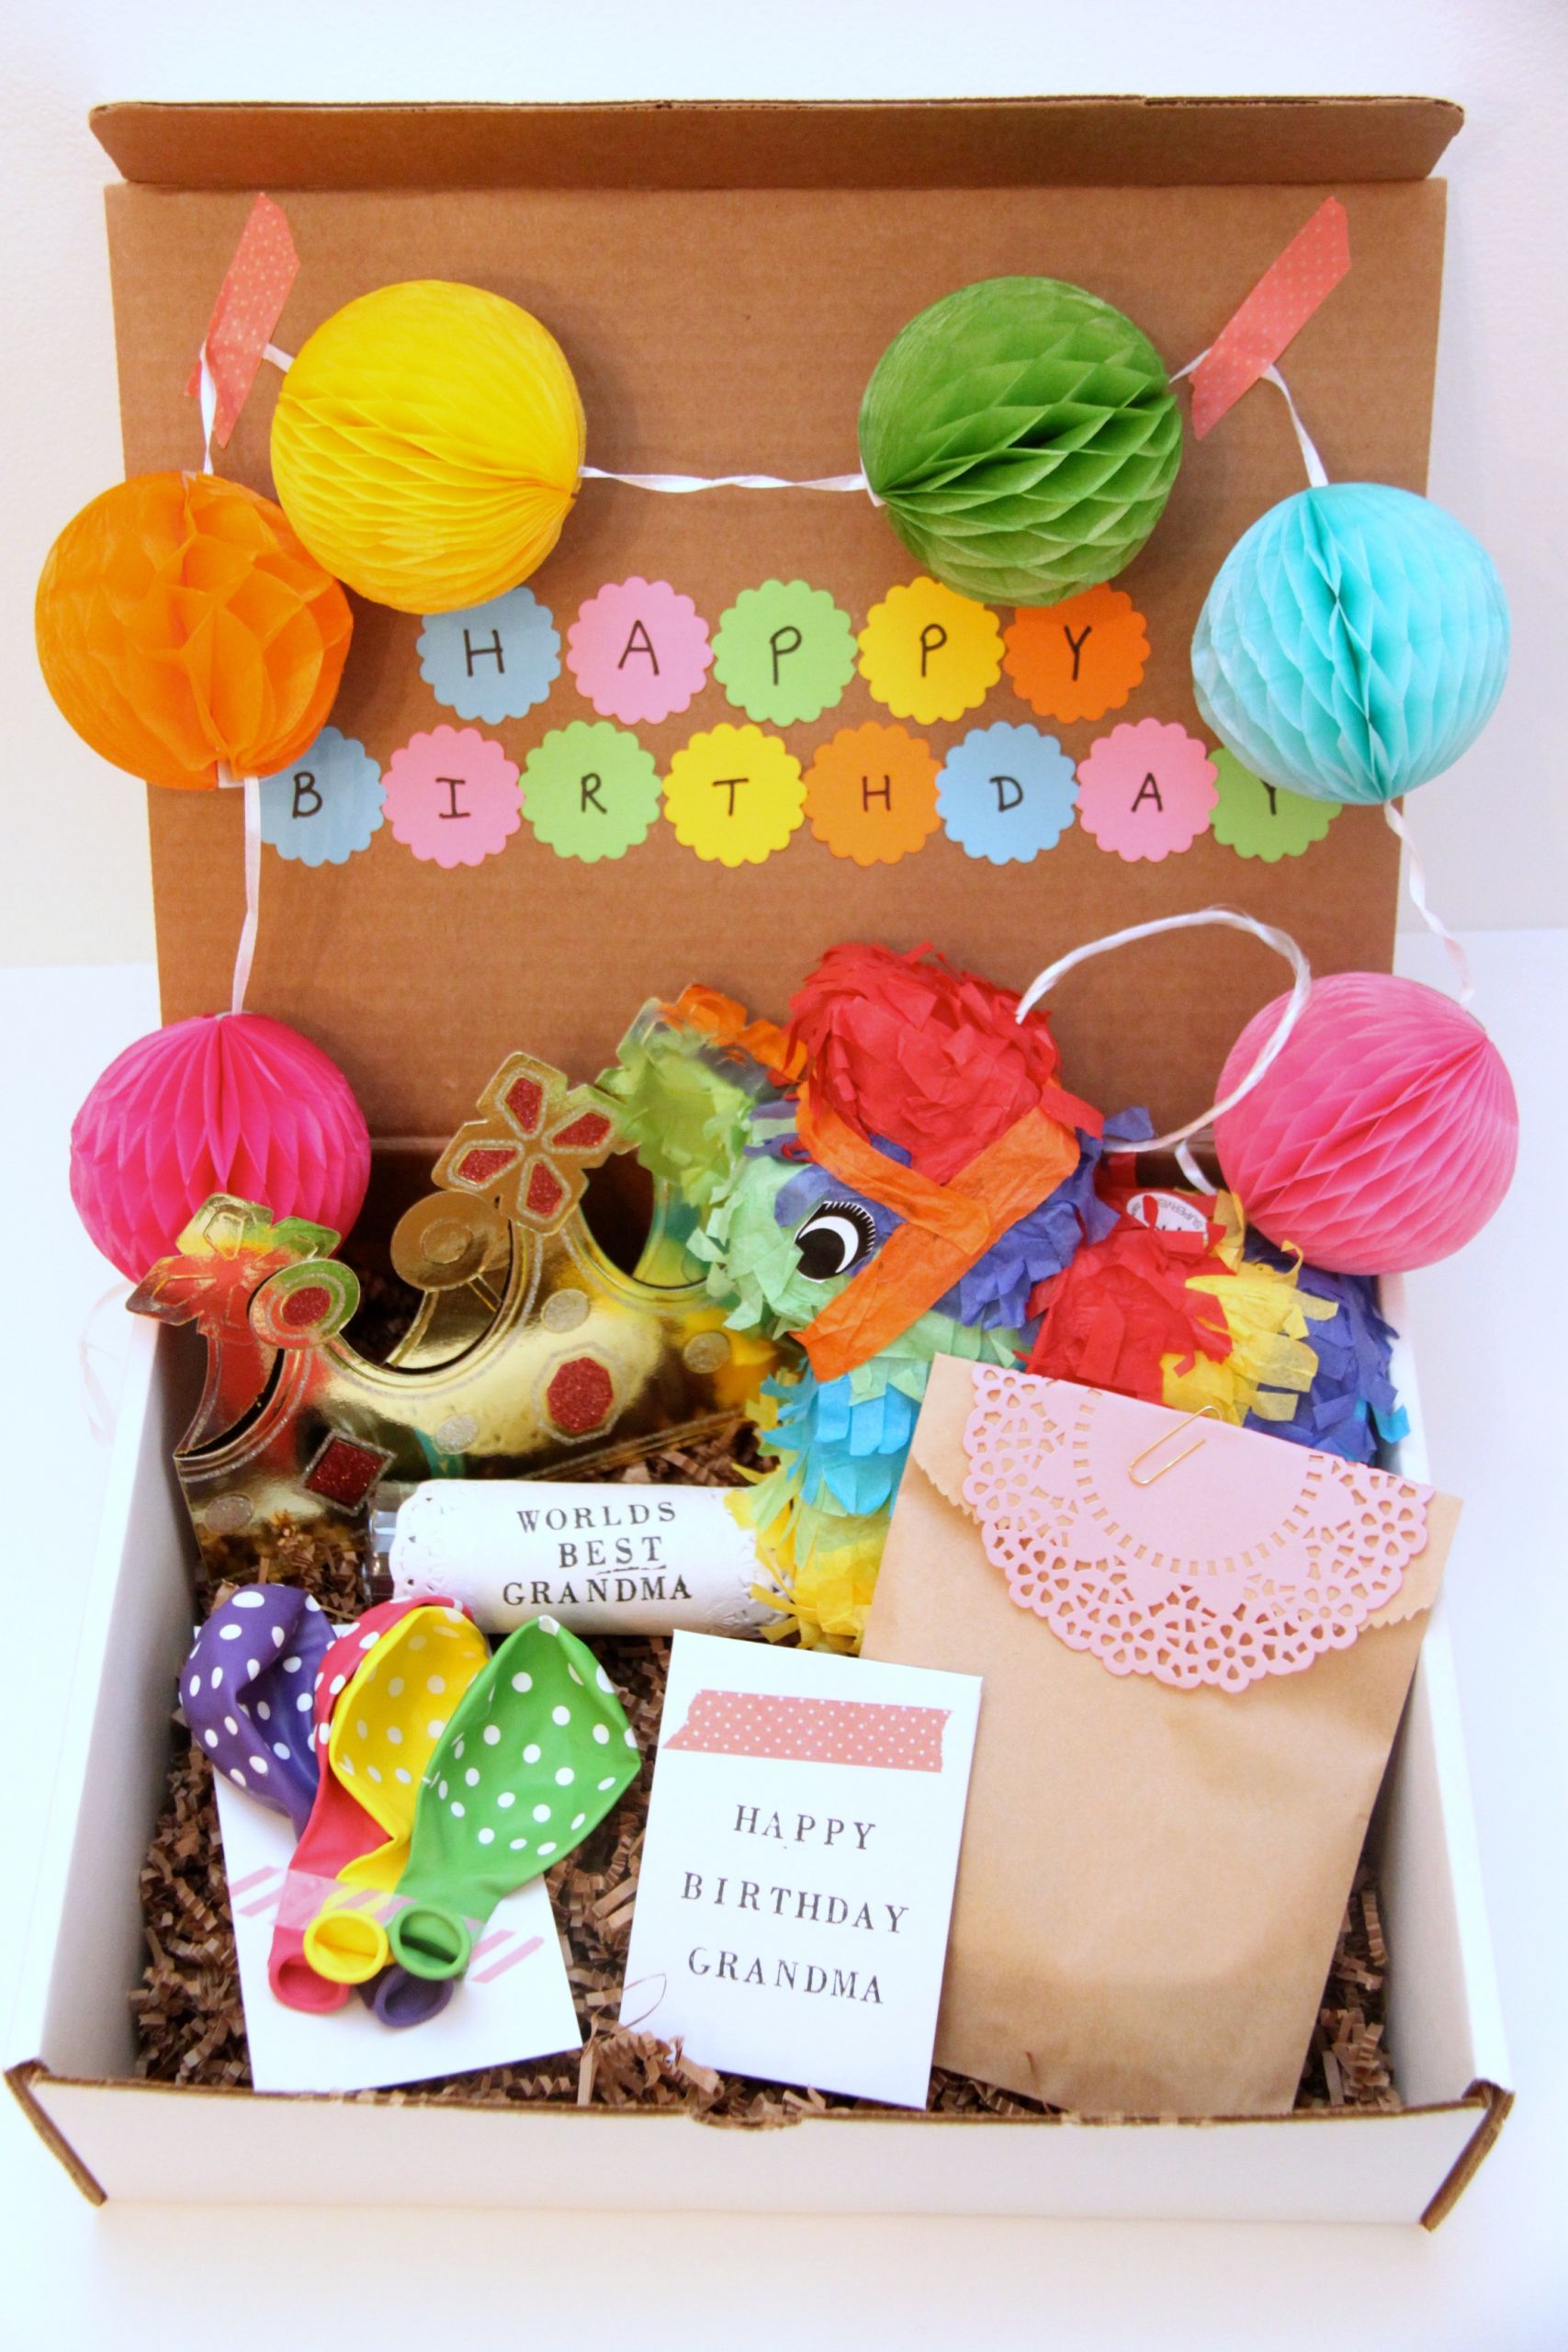 Birthday Box Gift Ideas
 A Birthday In a Box Gift for Grandma Smashed Peas & Carrots